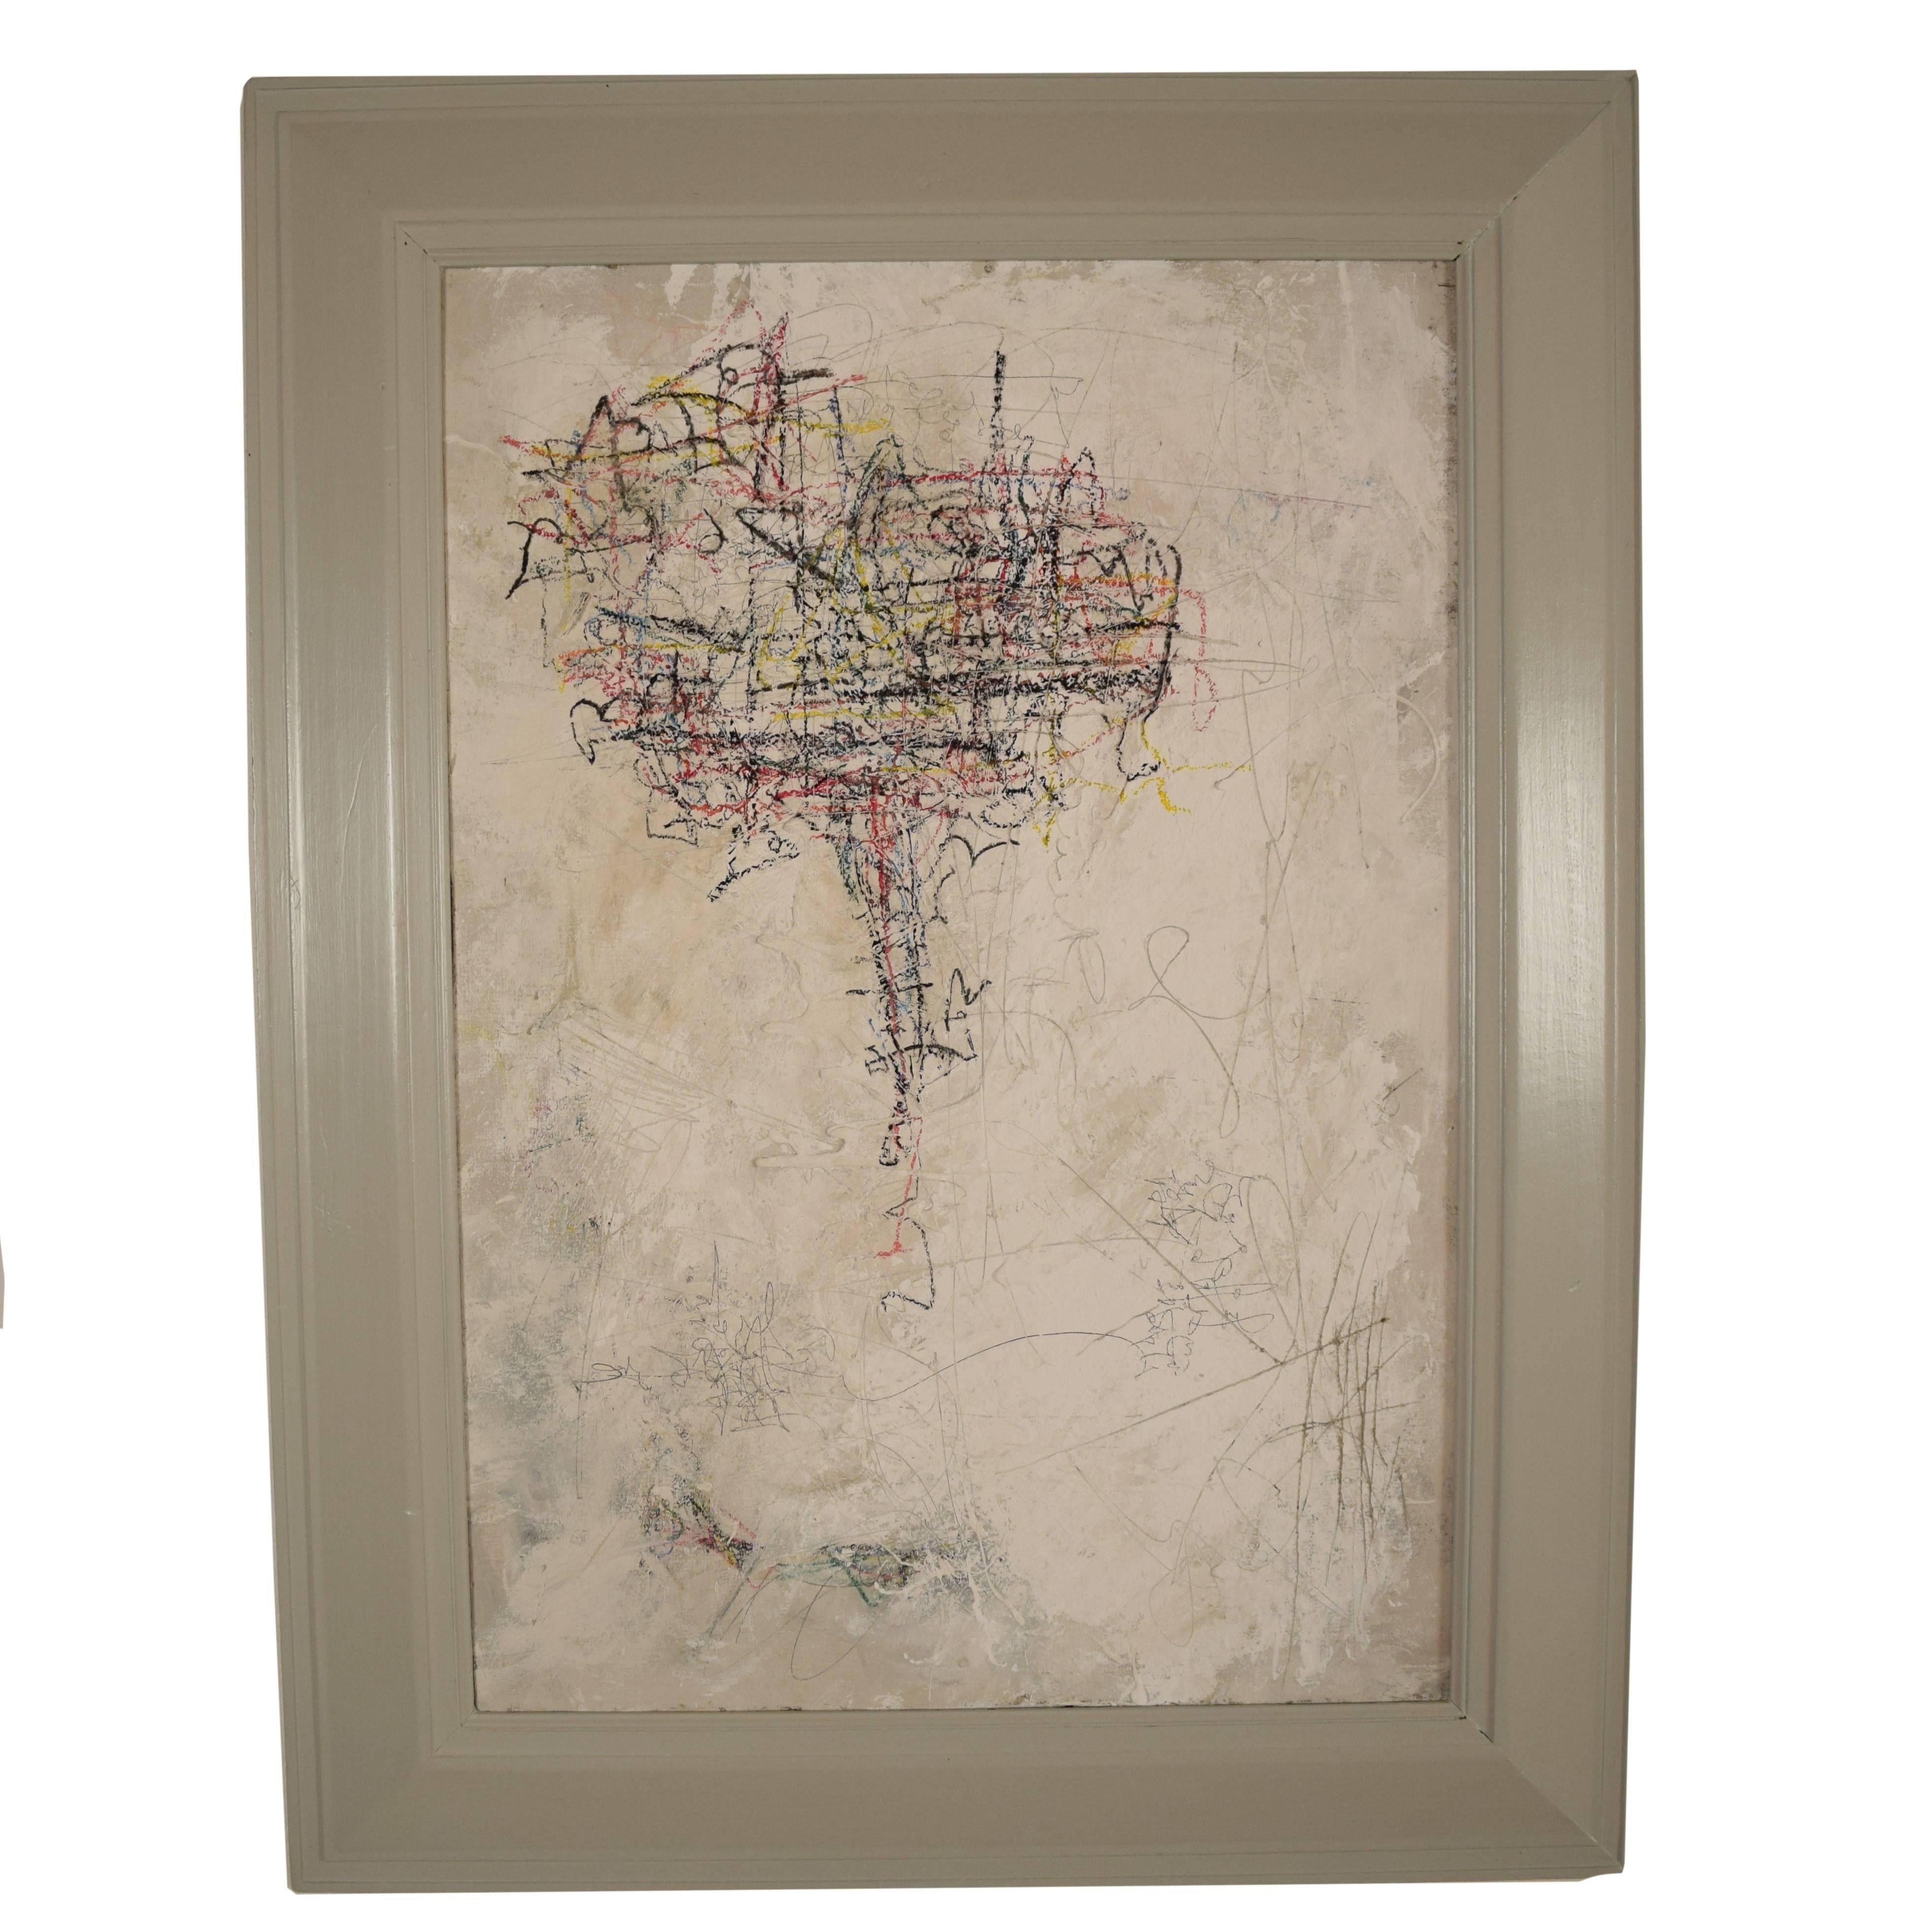 Contemporary Modern Abstract Painting  Acrylic on Carton in a Grey Wood Frame